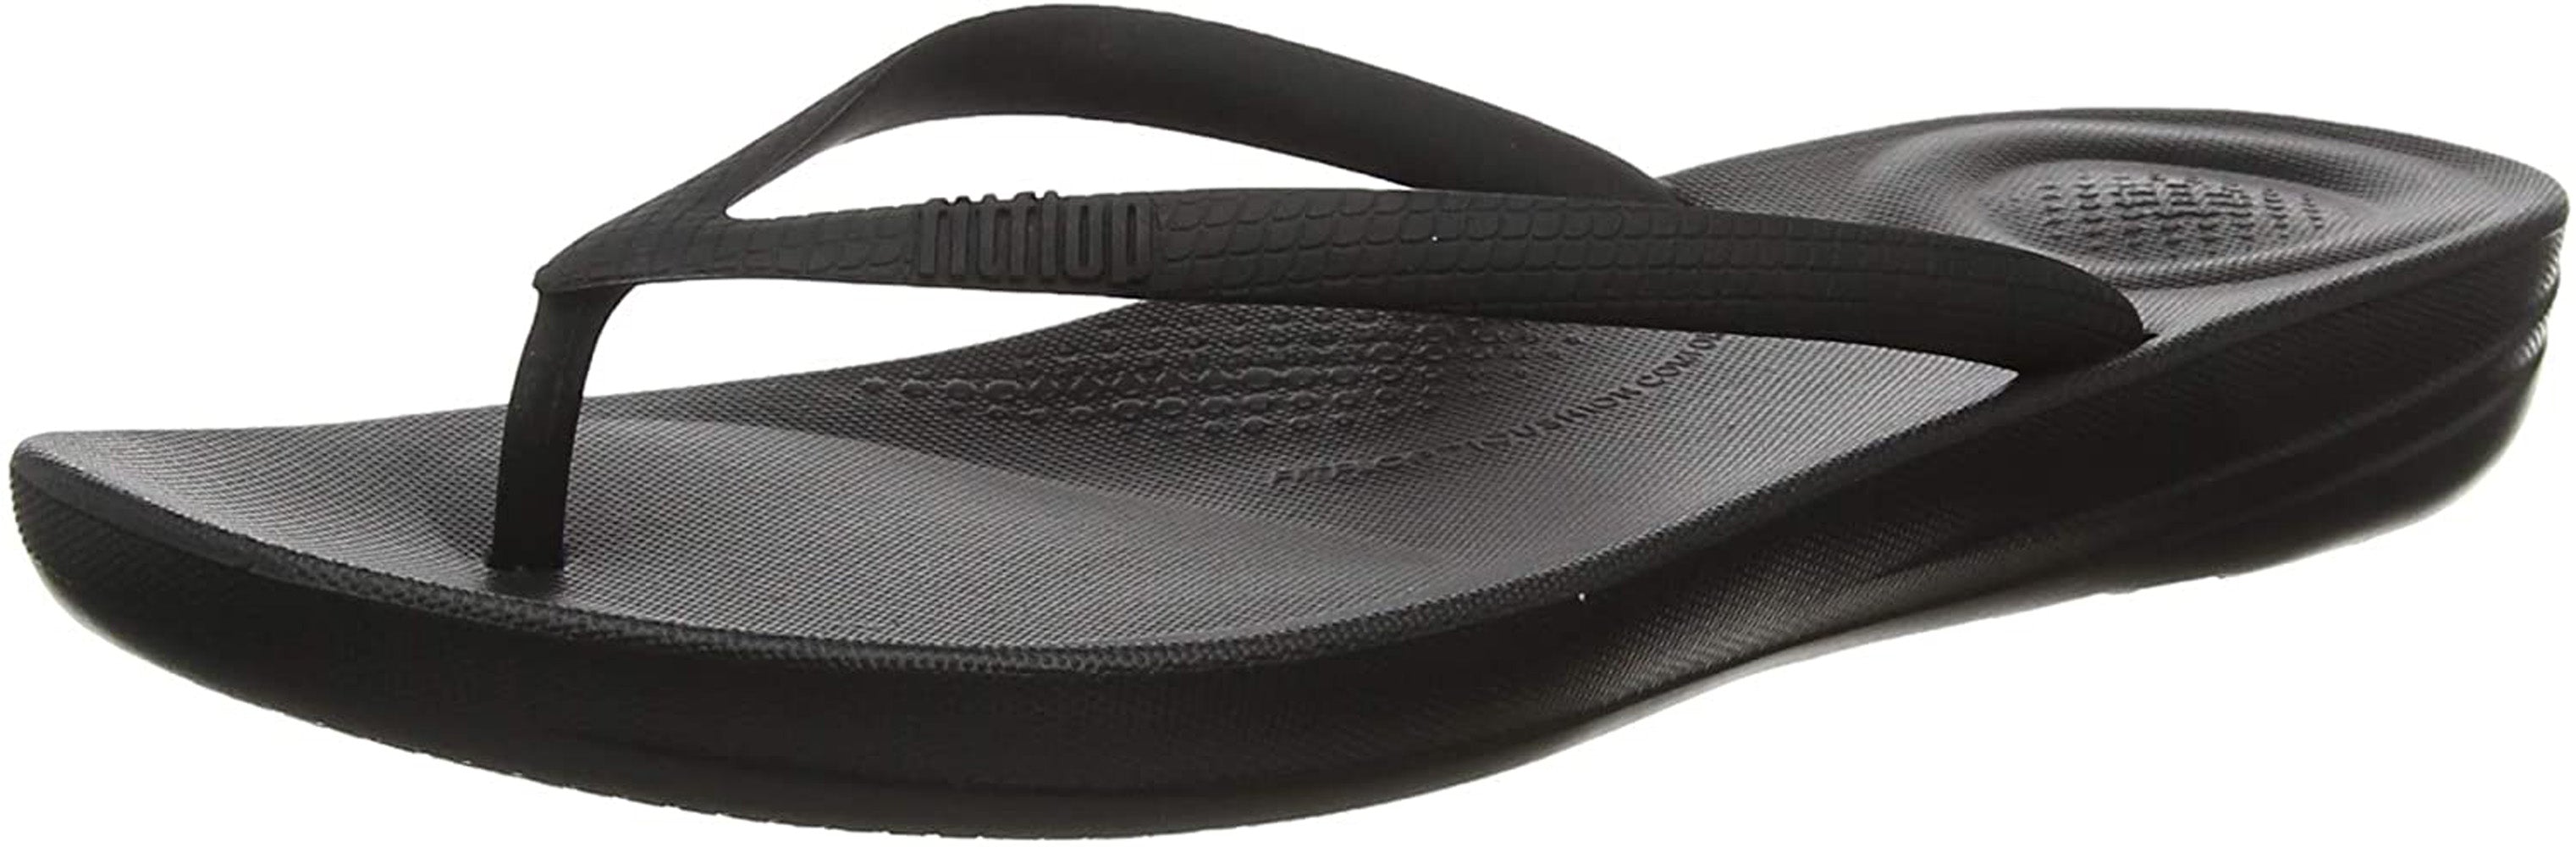 Women's FitFlop Iqushion Ergonomic Flip-Flops in All Black Side Angle View